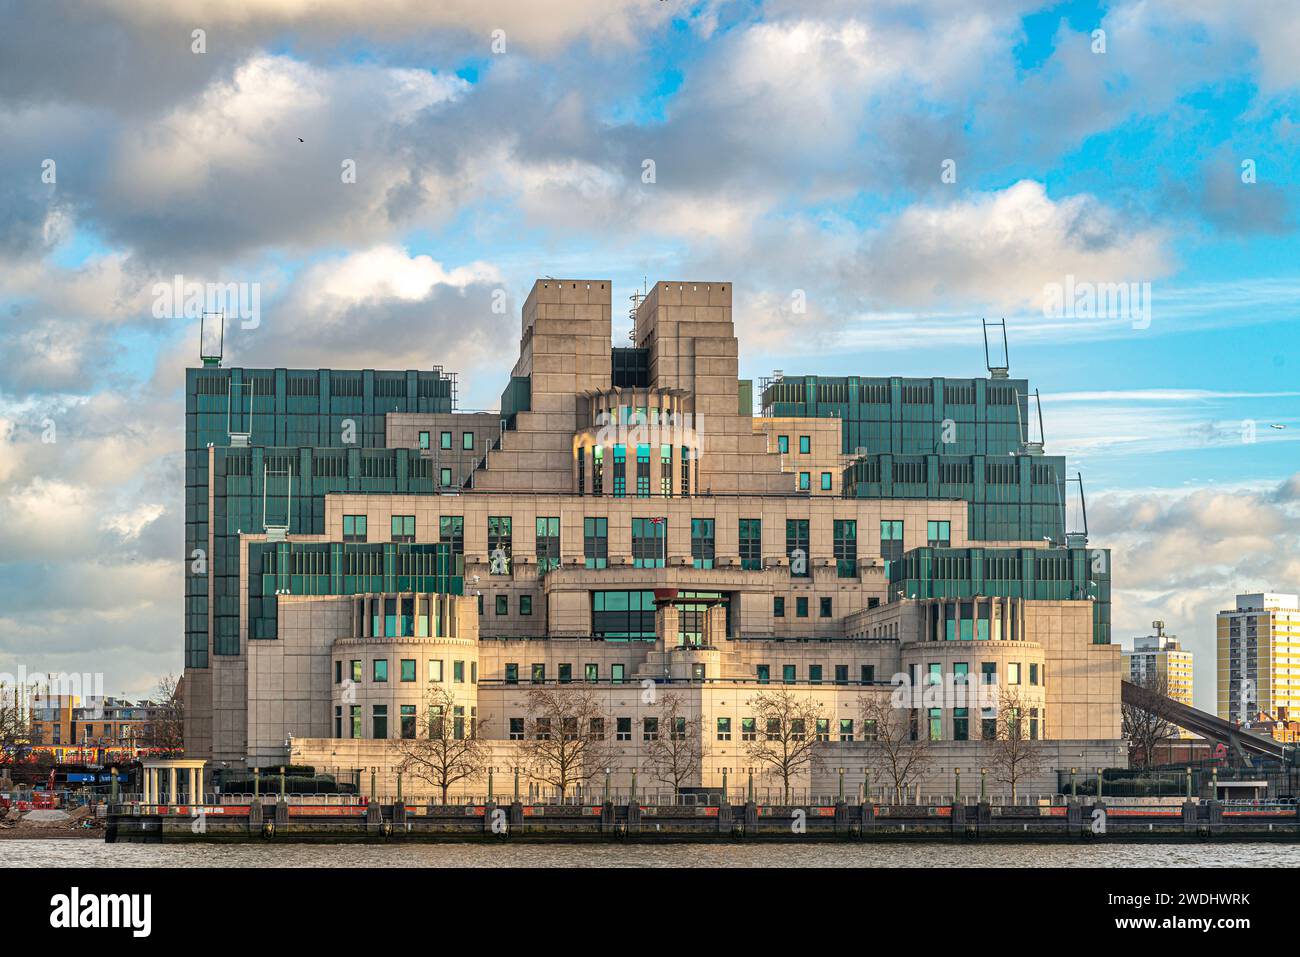 The SIS Building, also called the MI6 Building, at Vauxhall Cross houses the headquarters of the Secret Intelligence Service Stock Photo